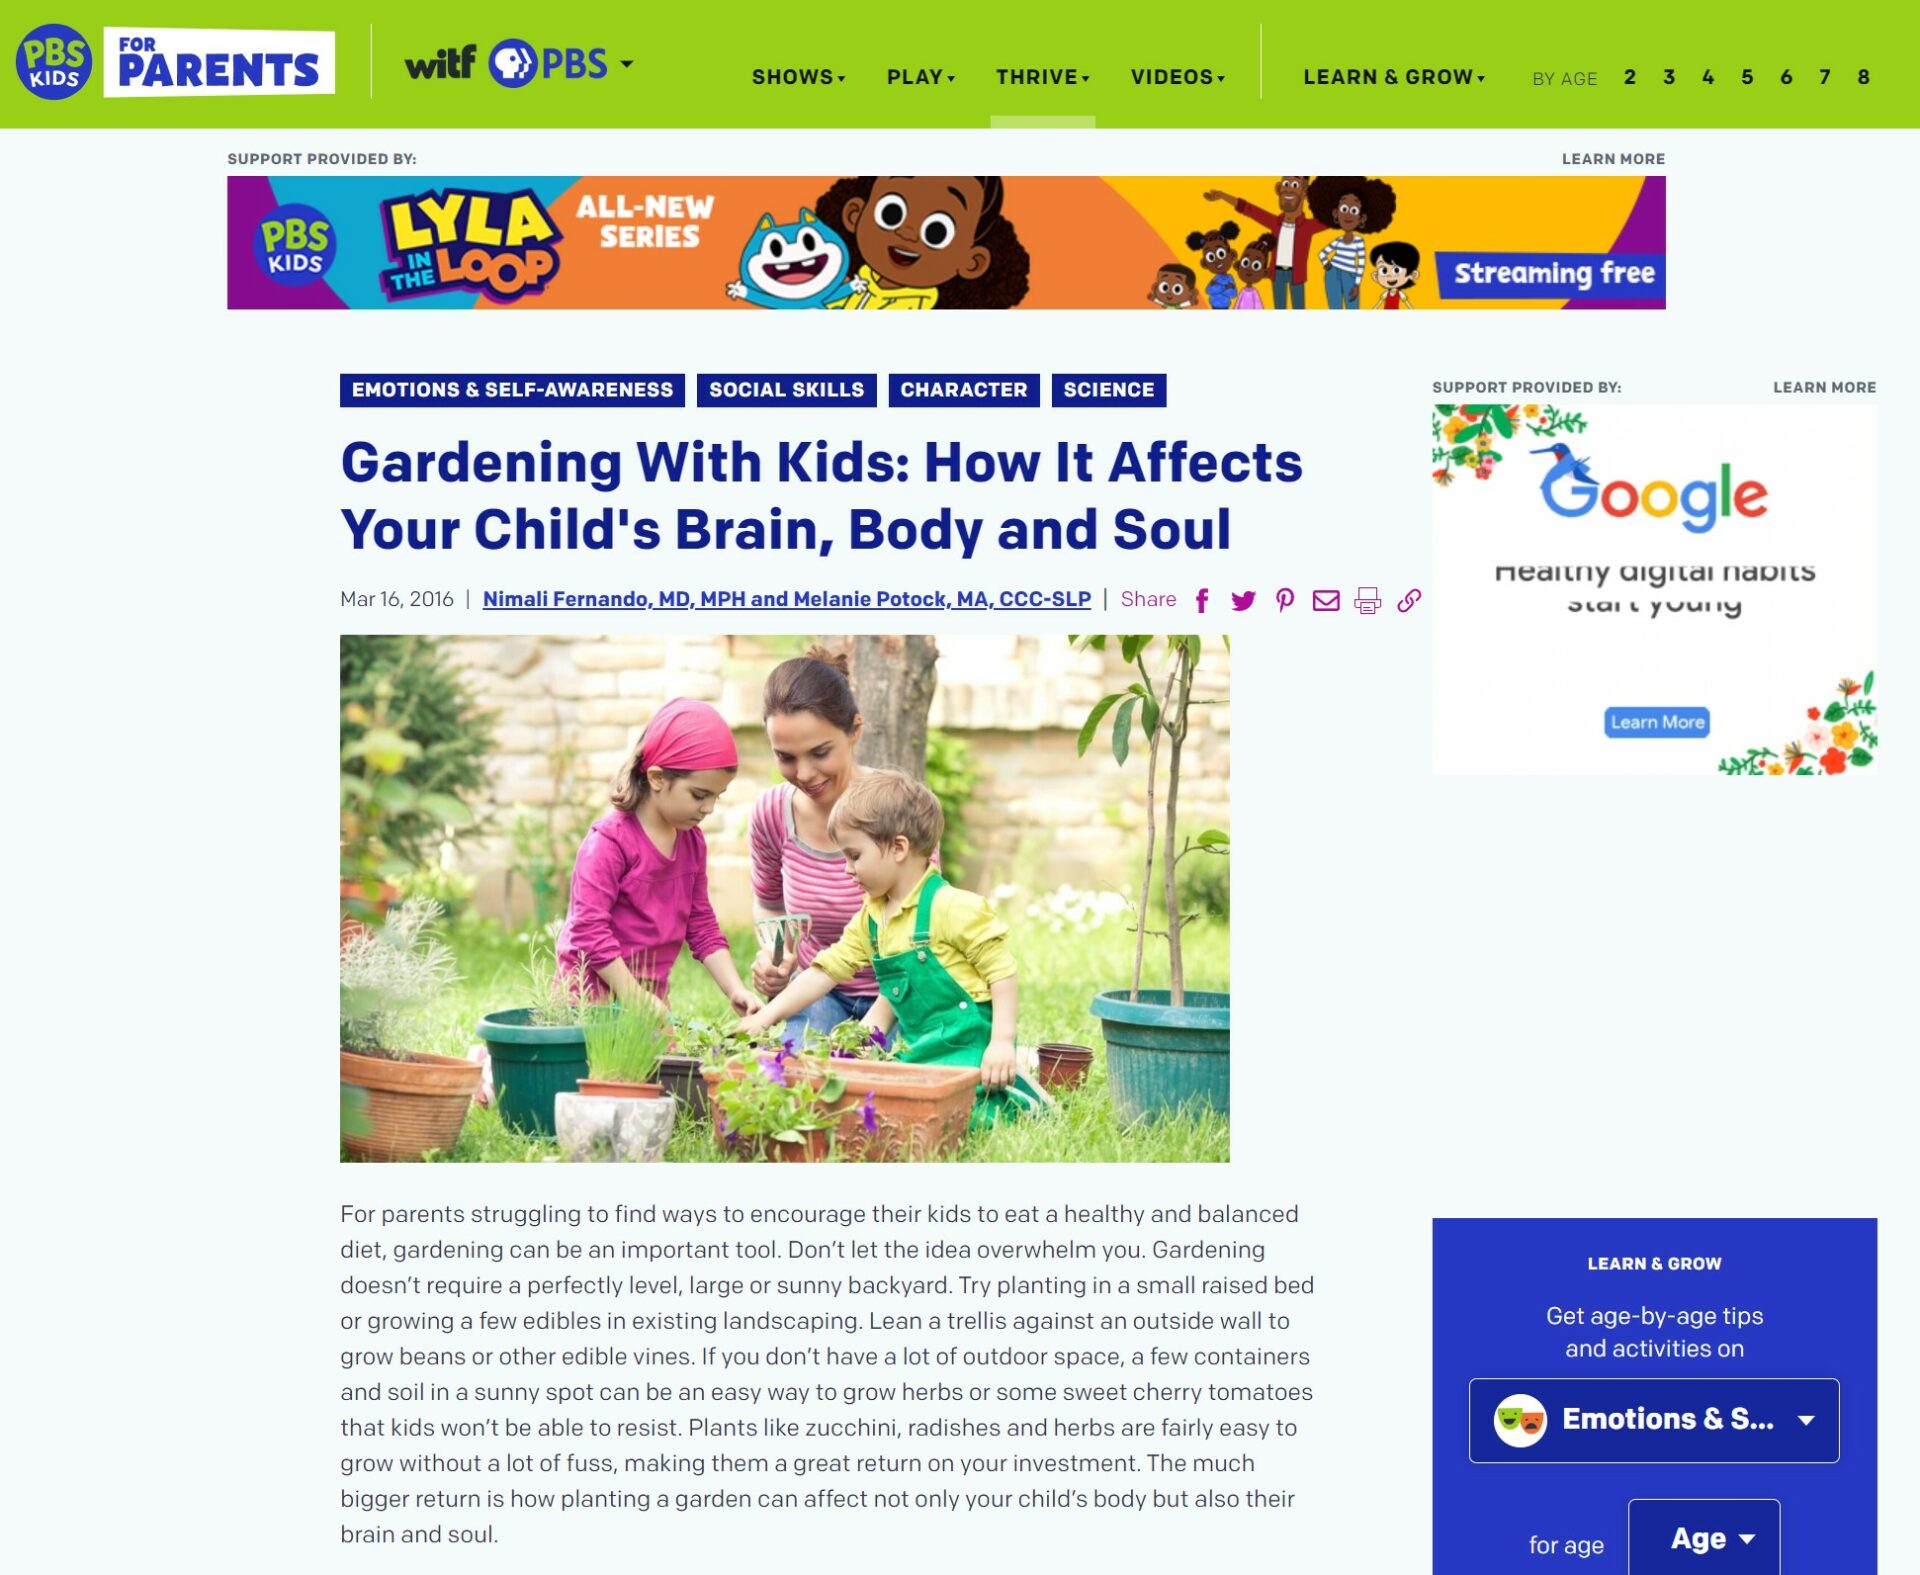 Gardening With Kids: How It Affects Your Child’s Brain, Body, and Soul